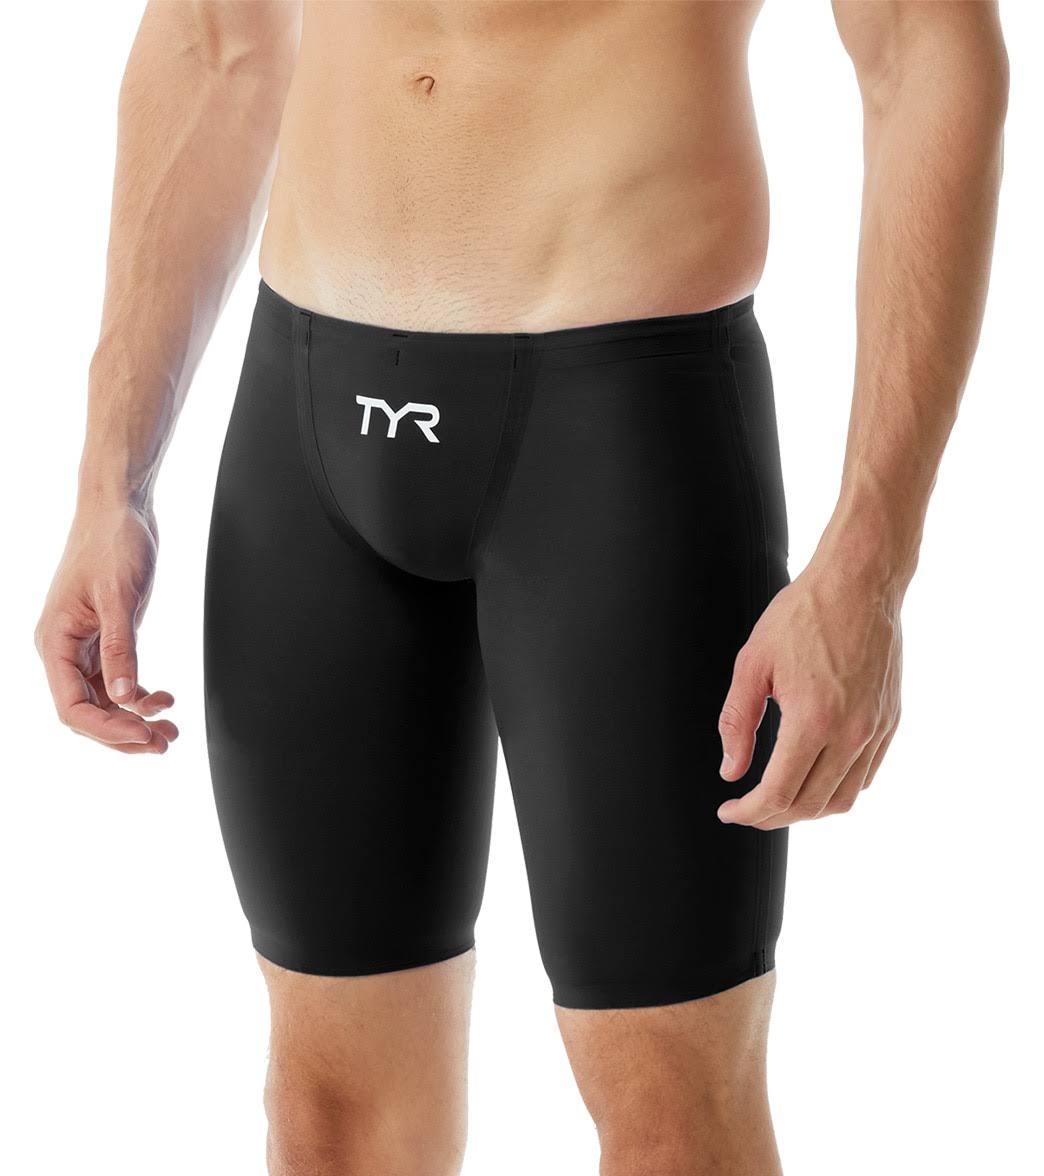 TYR Men's Invictus Solid Jammer Swimsuit INMILW6A Black 22